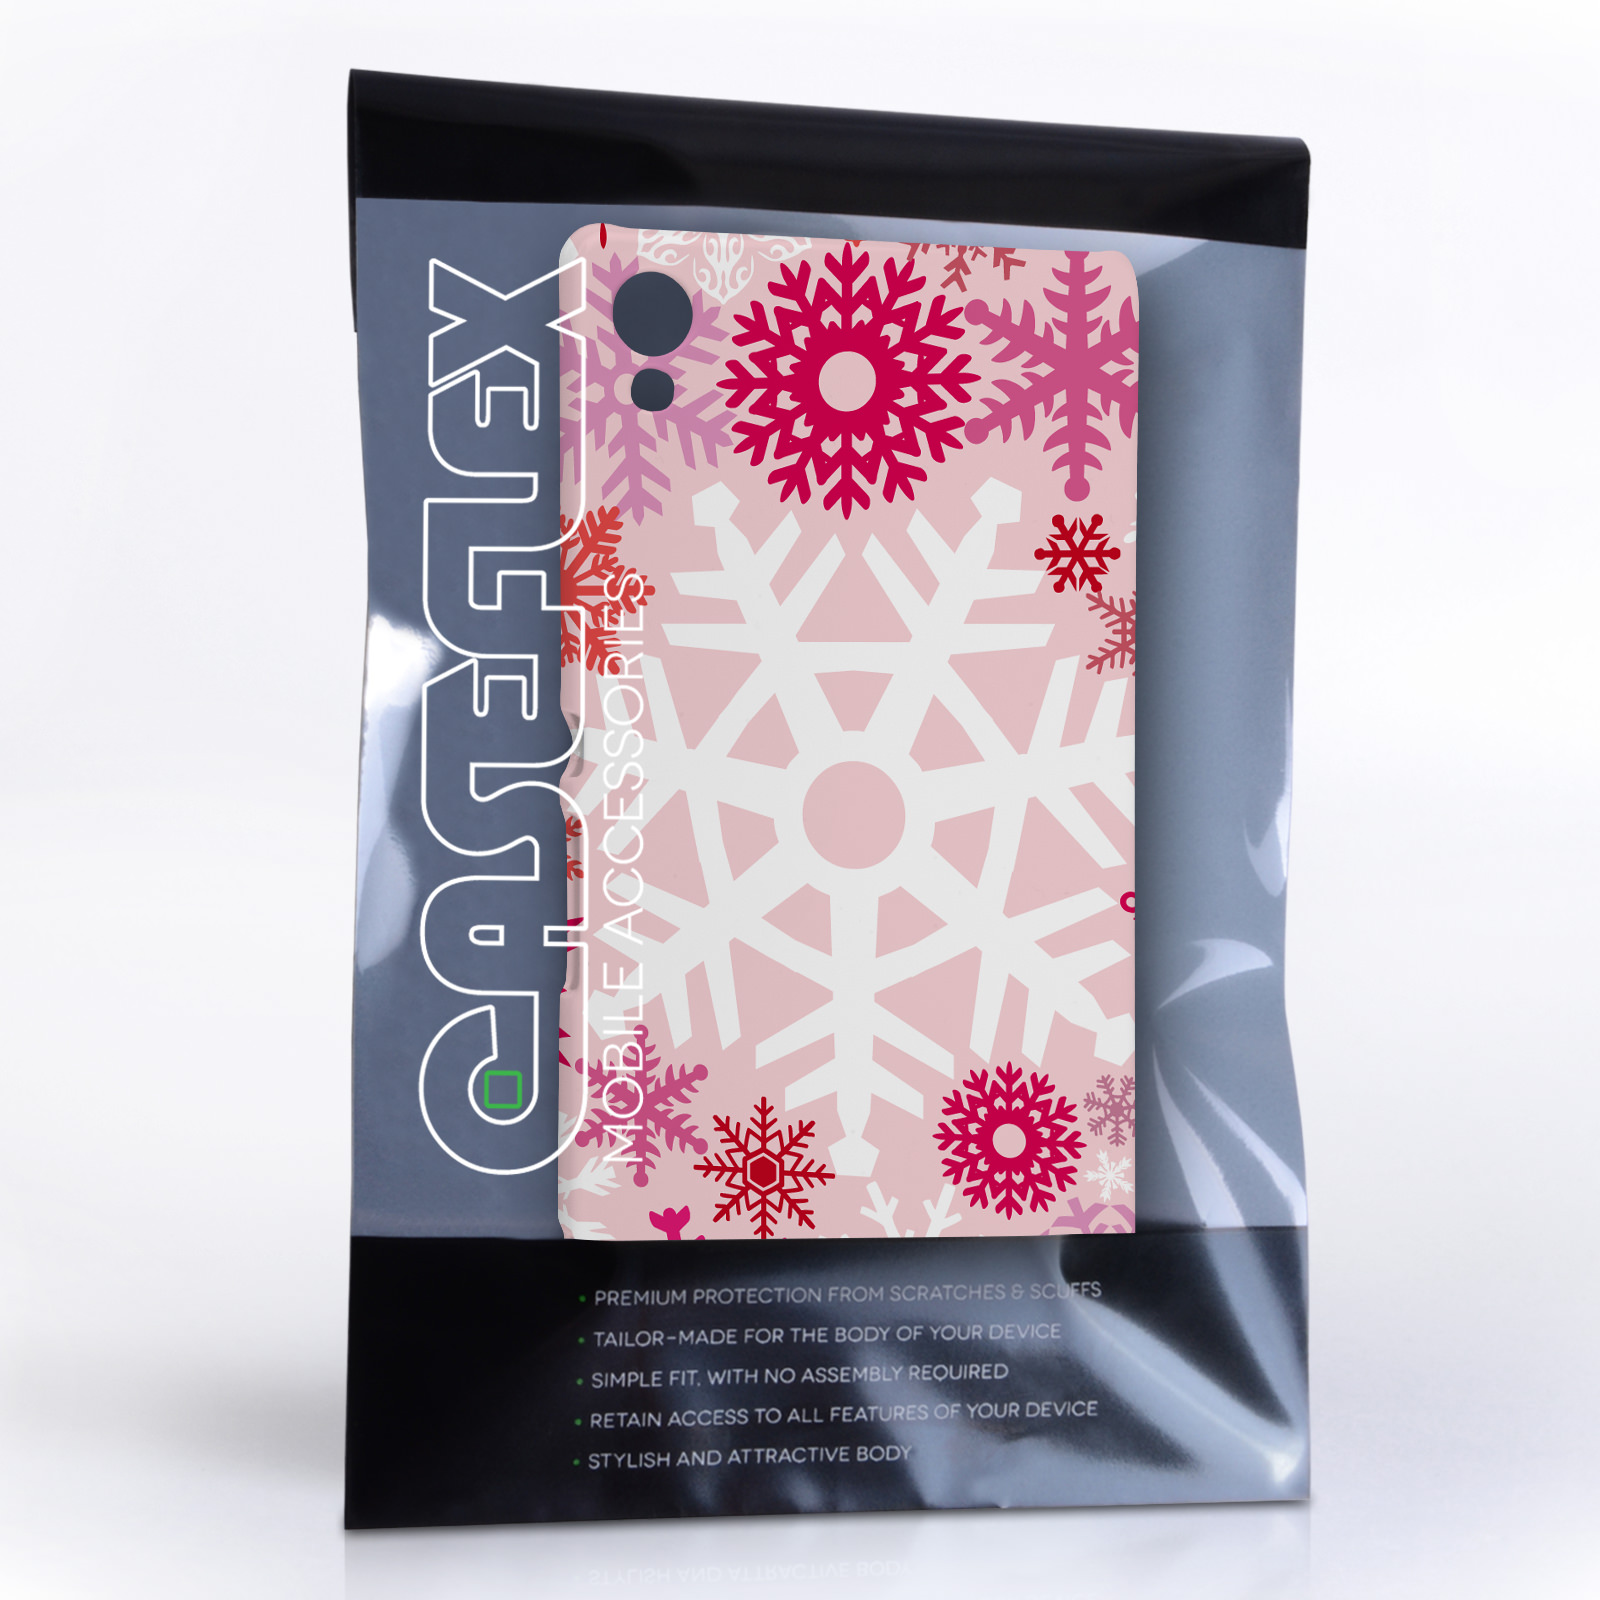 Caseflex Sony Xperia Z3+ Winter Christmas Snowflake Hard Case - Red / Pink